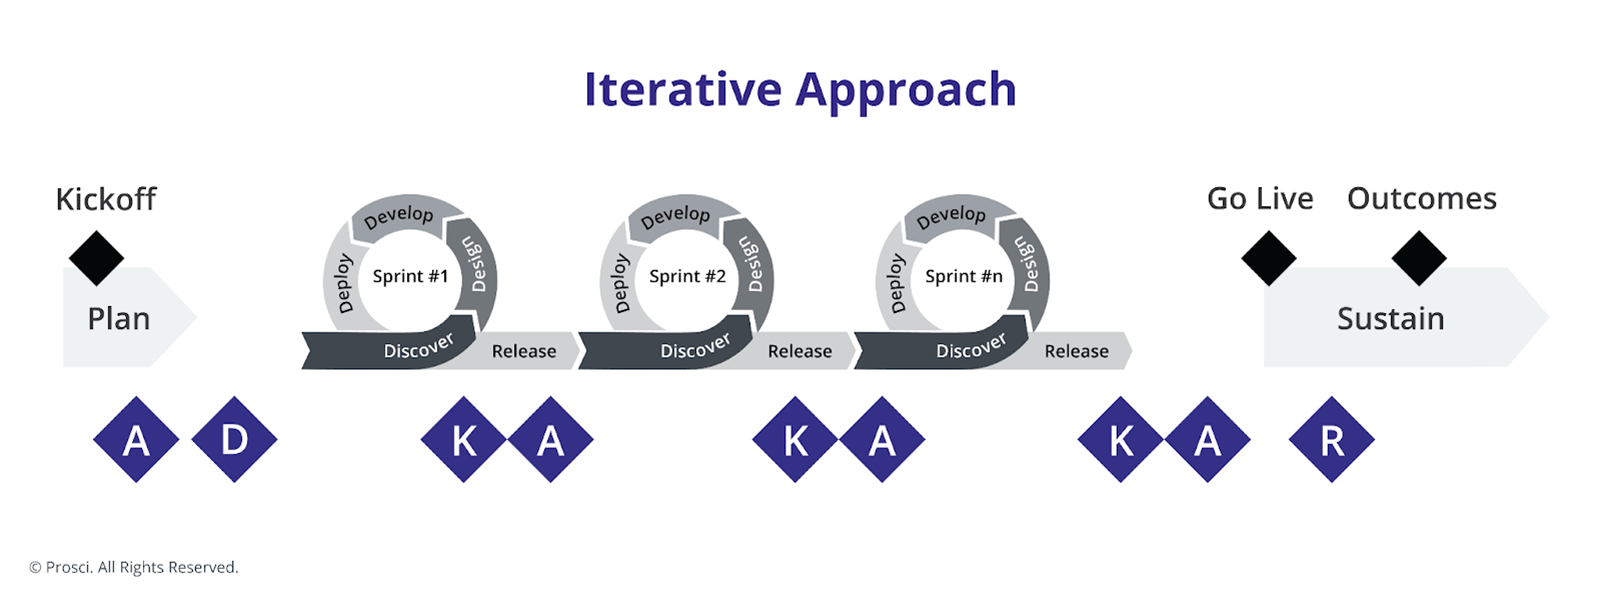 Iterative approach for change management